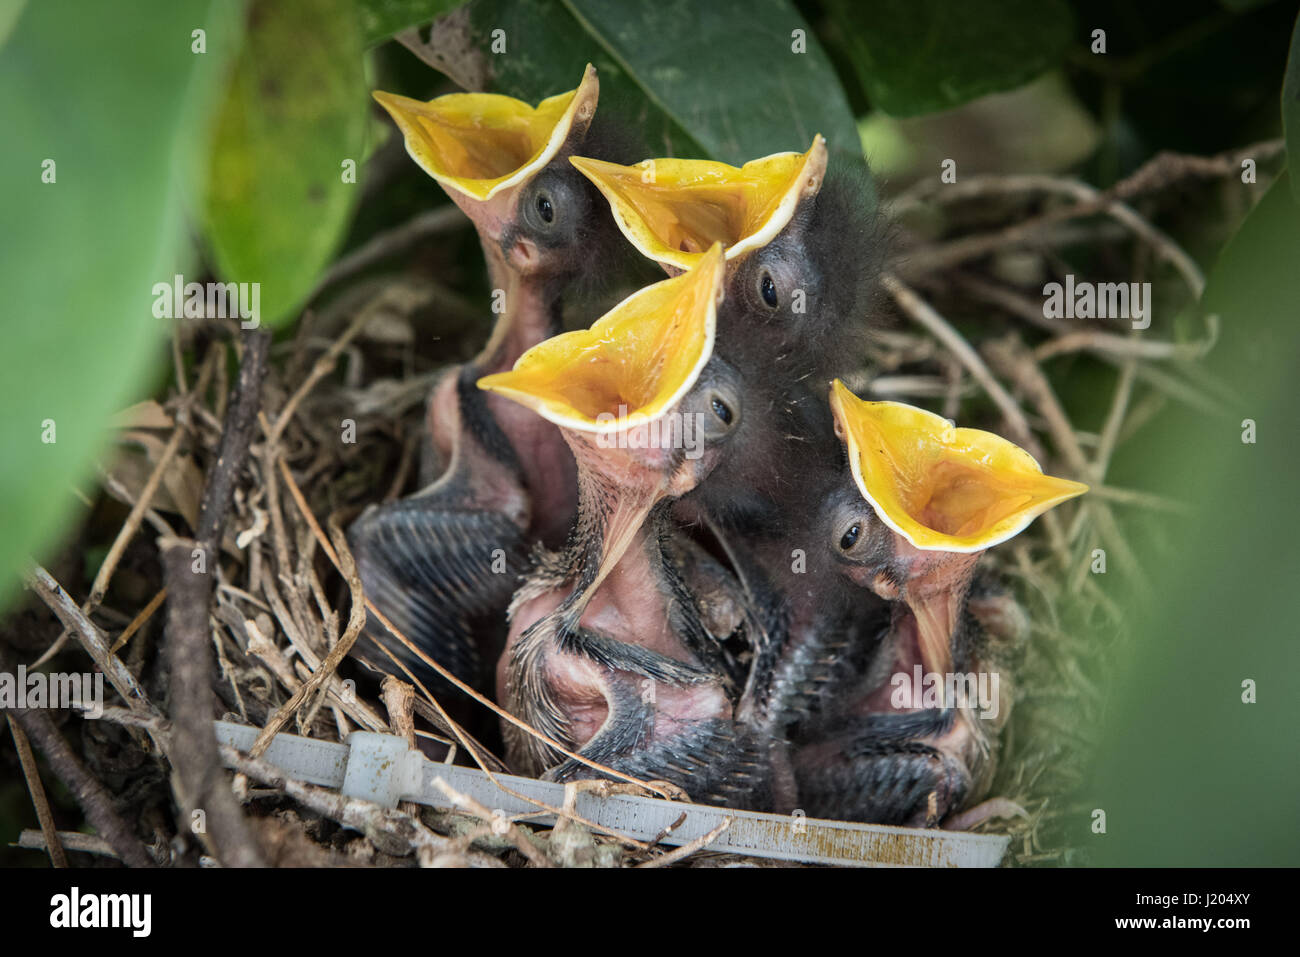 Hungry baby hatchling birds in a nest with their mouths open wide waiting for food. Stock Photo